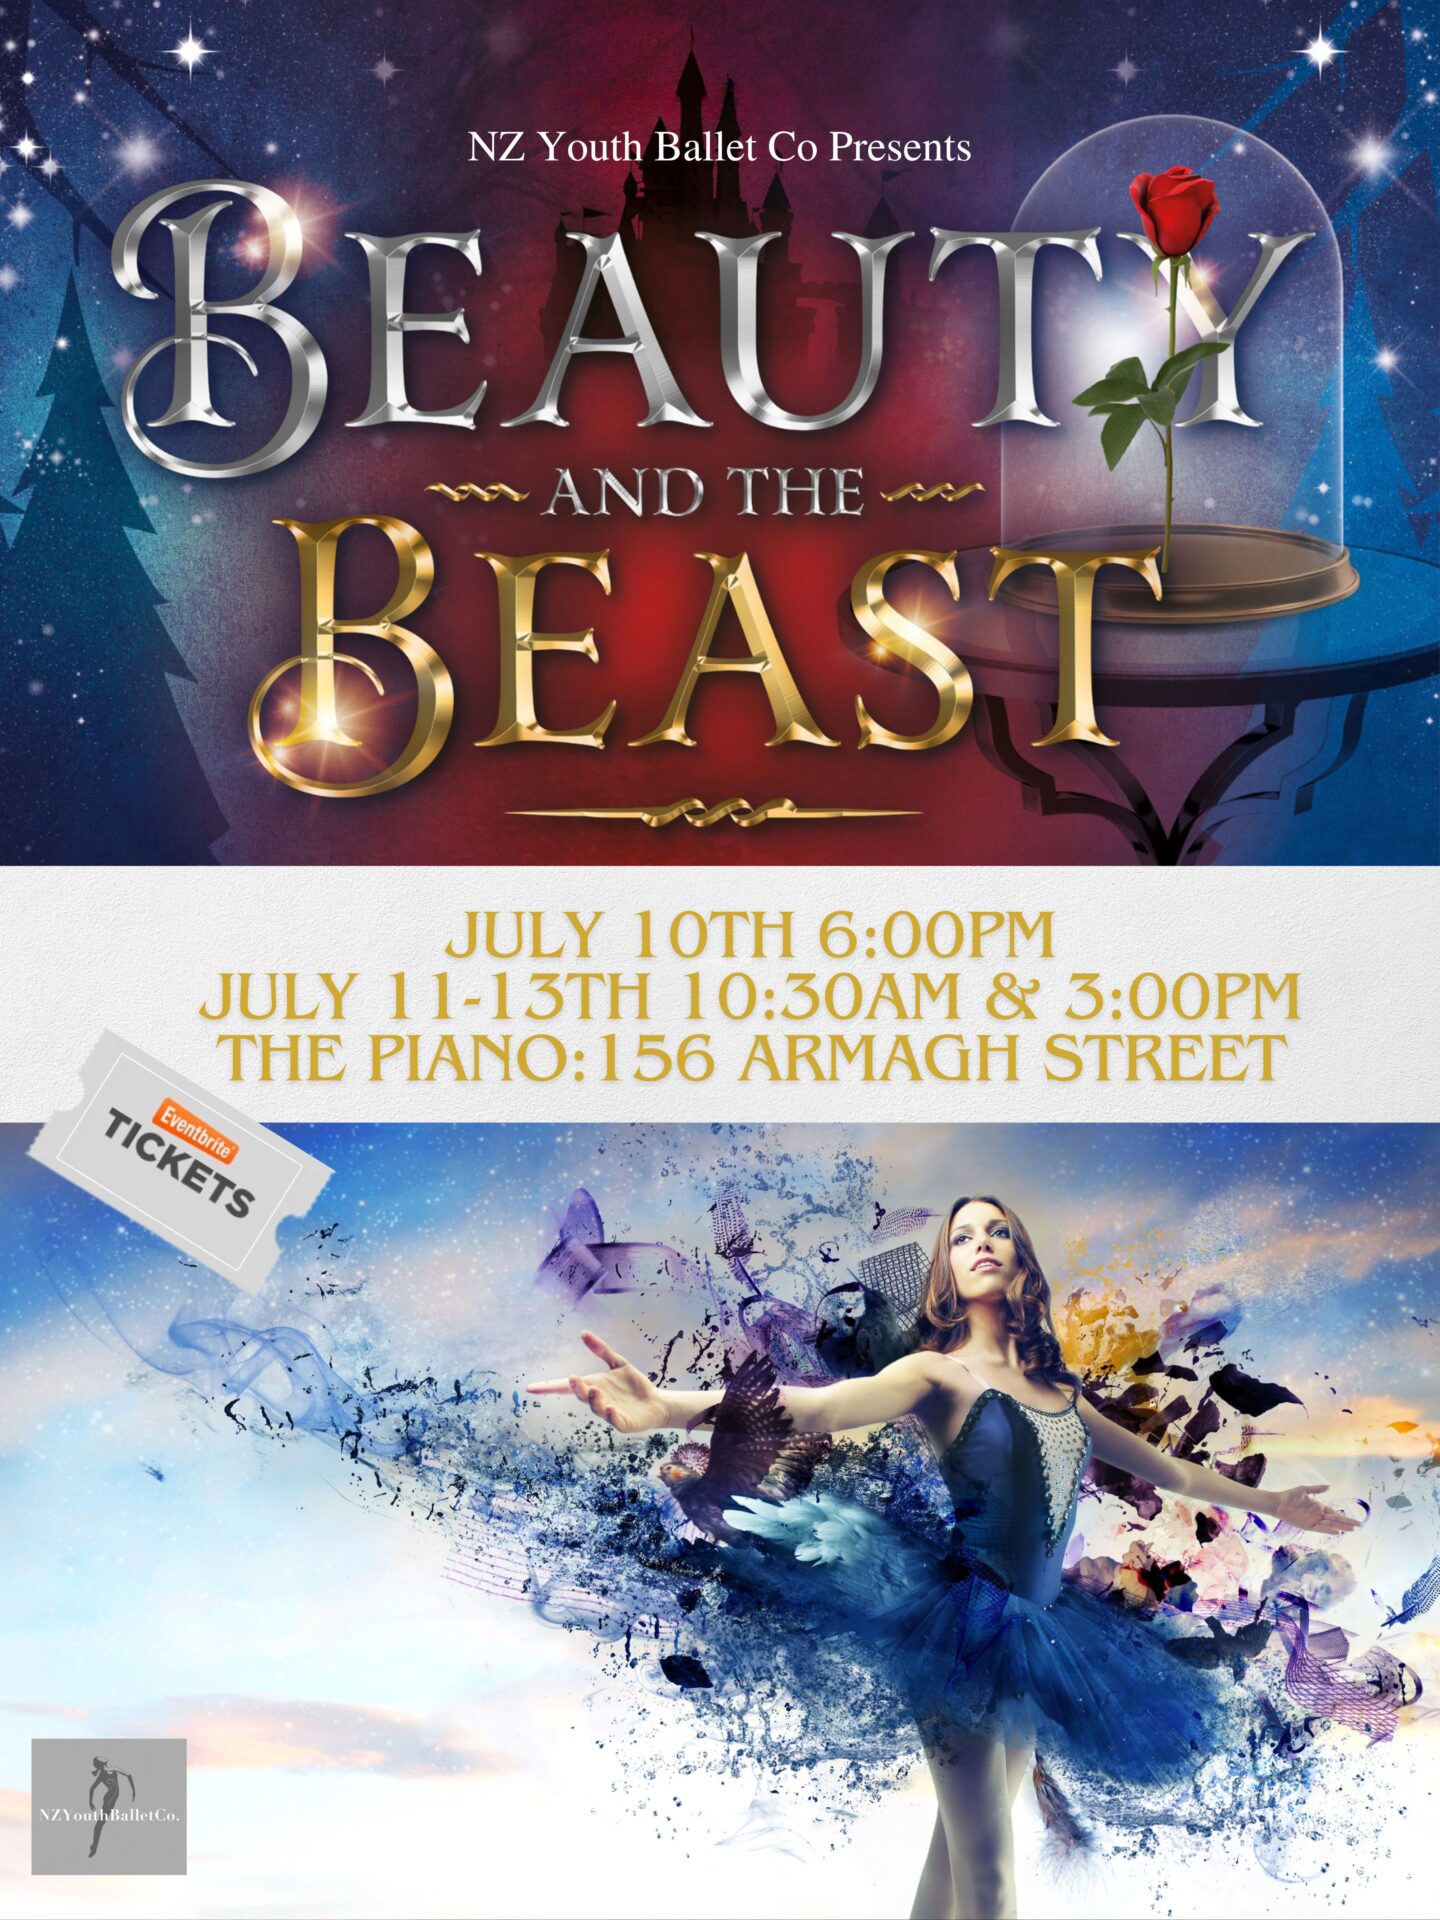 Image of Beauty and the Beast event